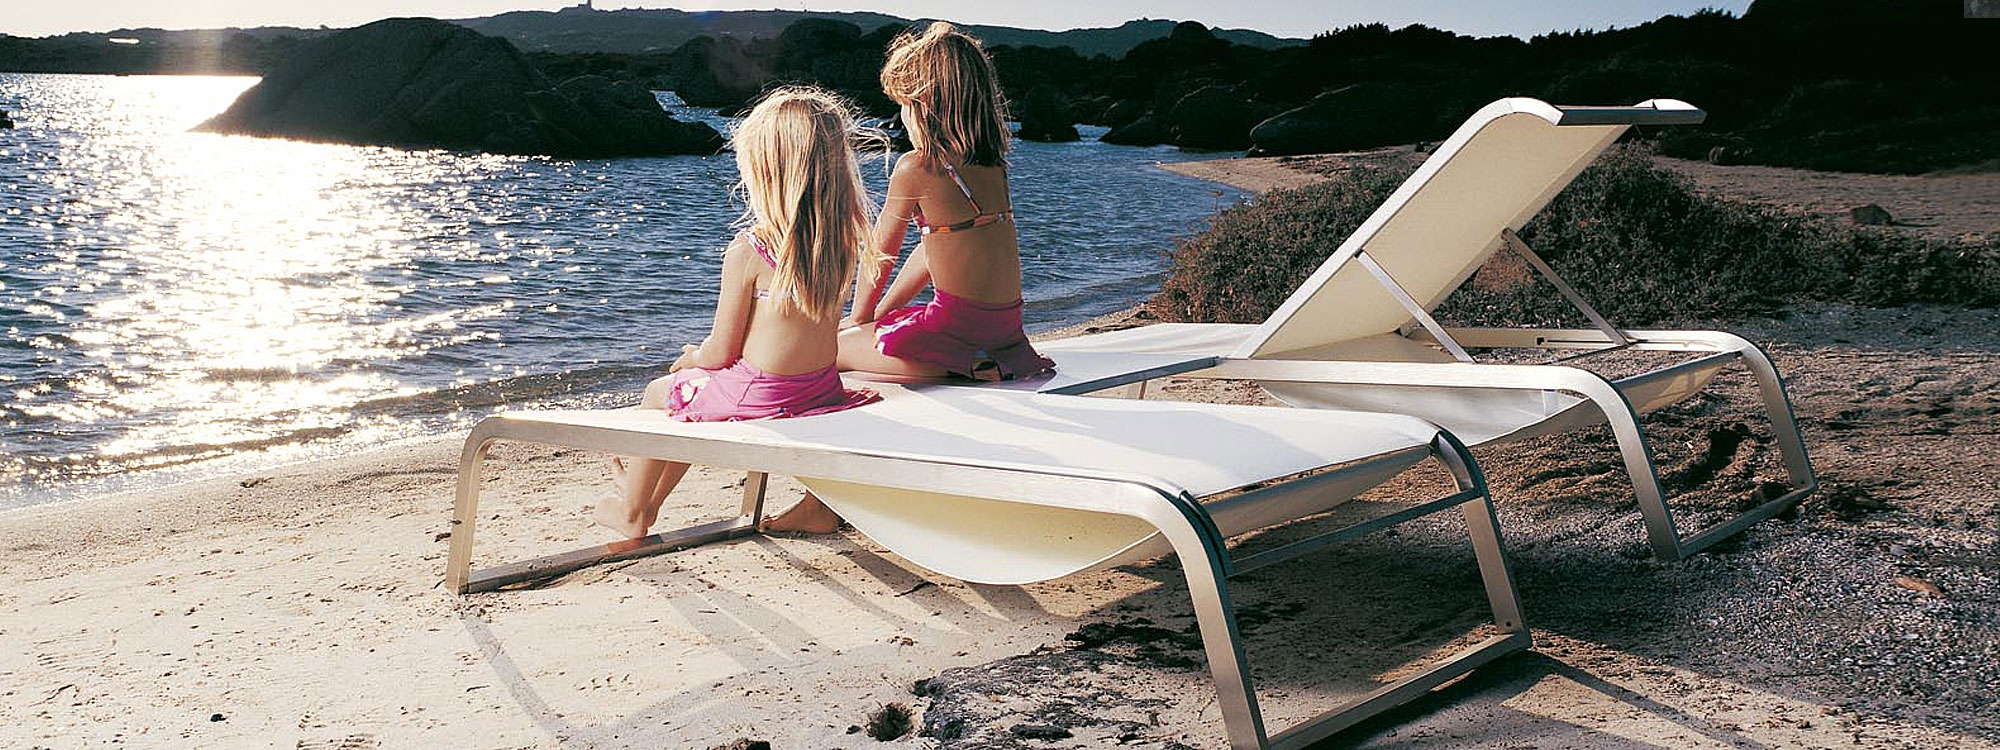 Image of pair of young girls sat on Coro L3 white sun loungers on sandy beach with sunlight glinting on the water